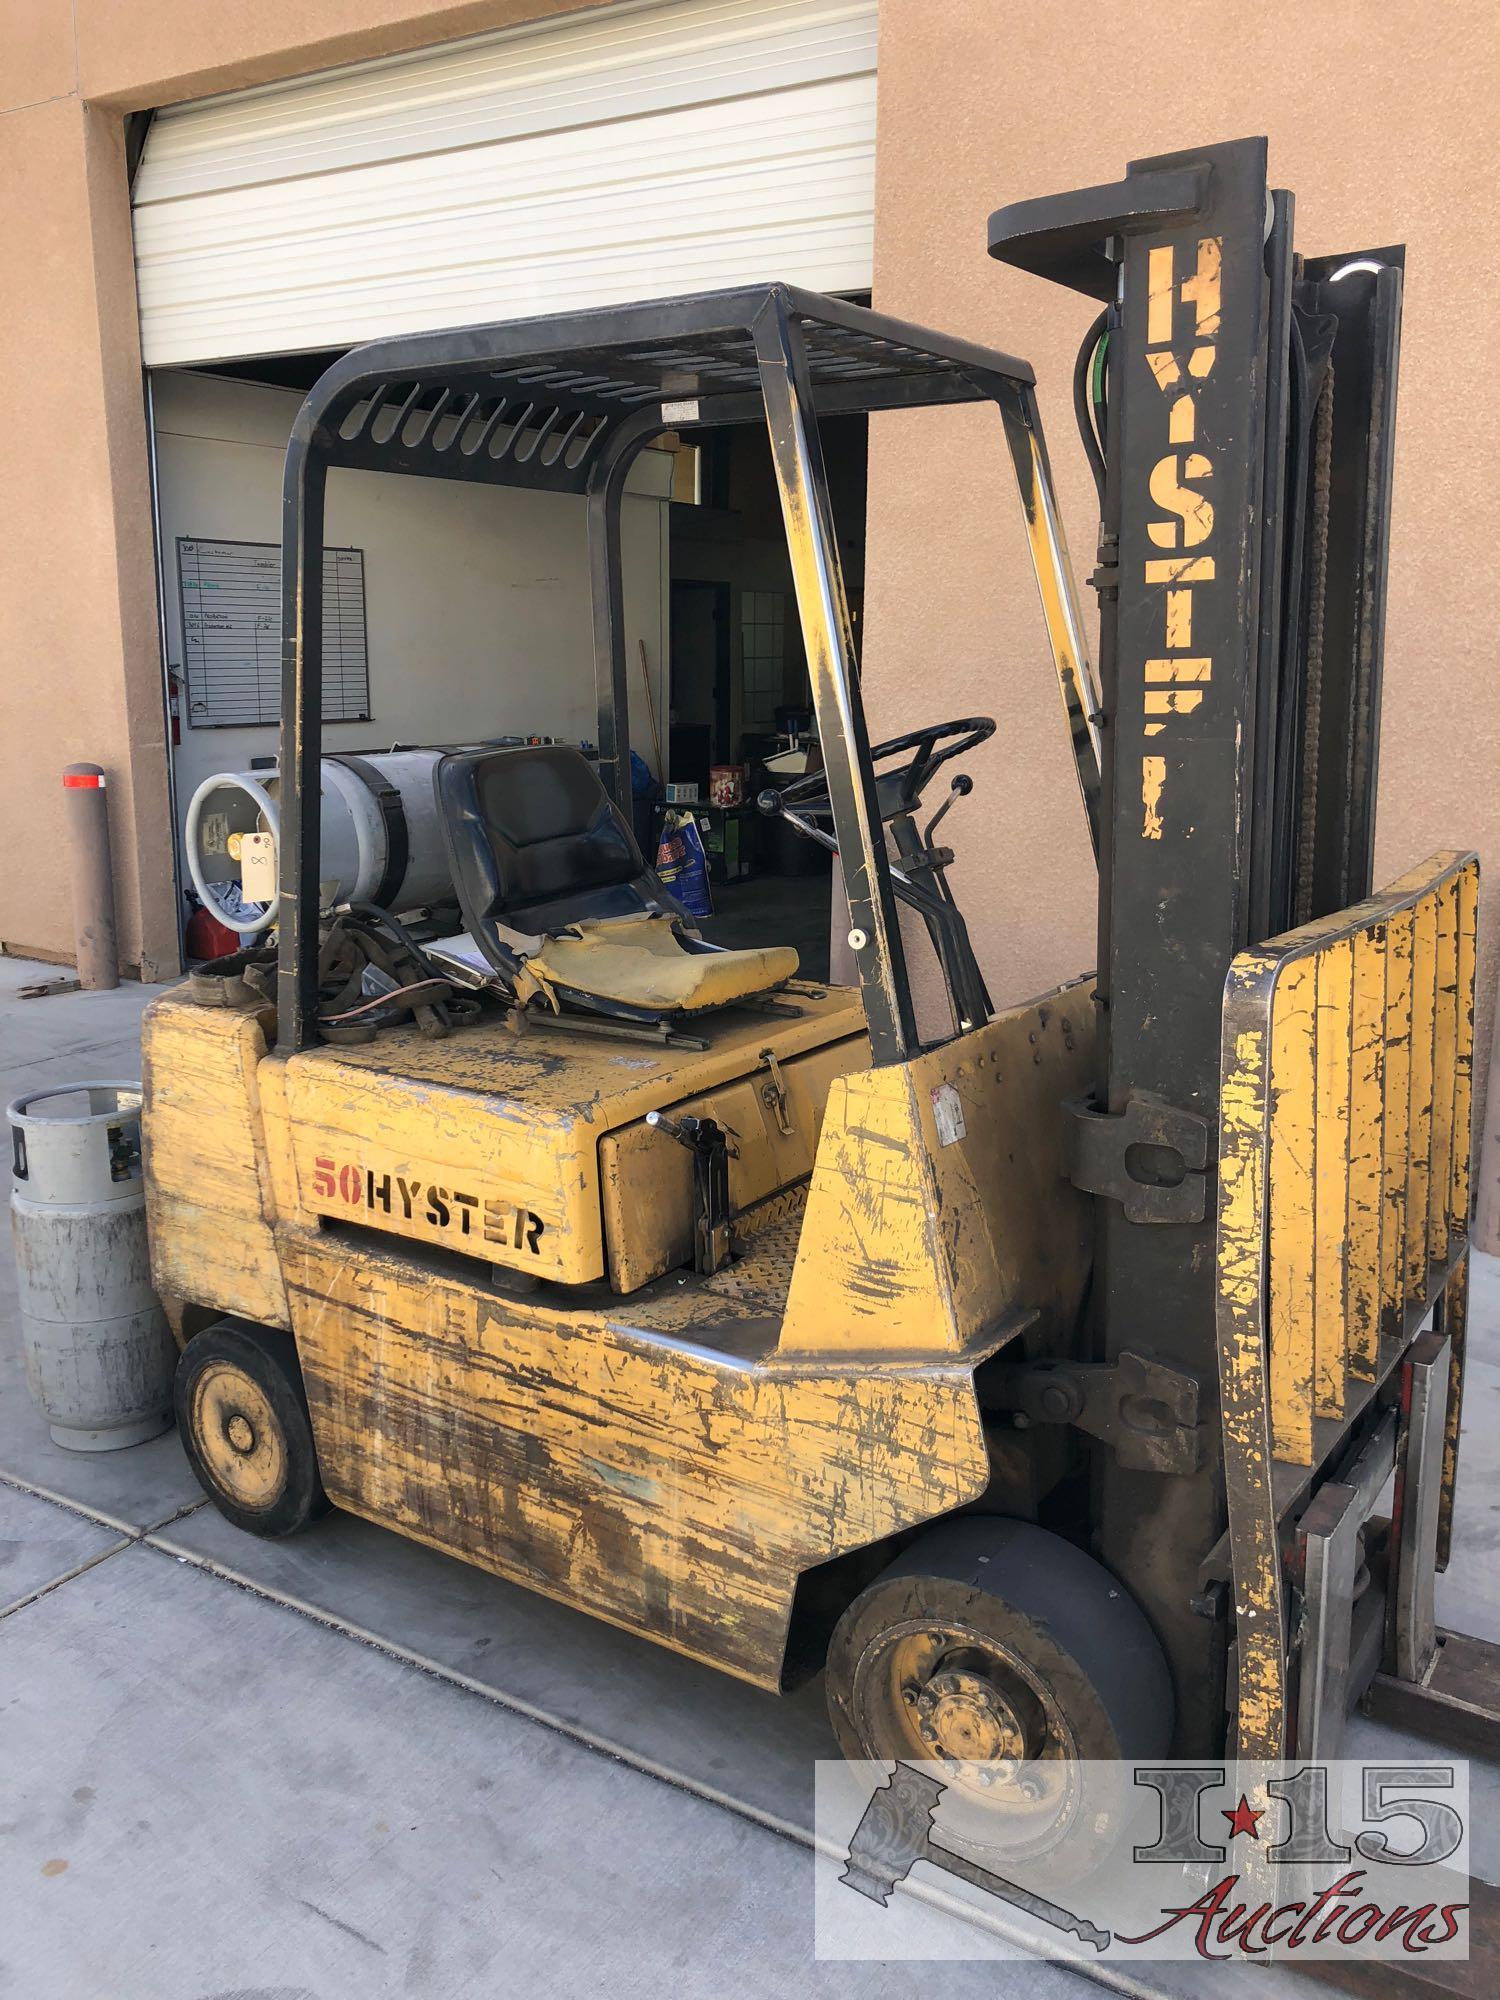 Hyster 5000 pound fork lift with side shift